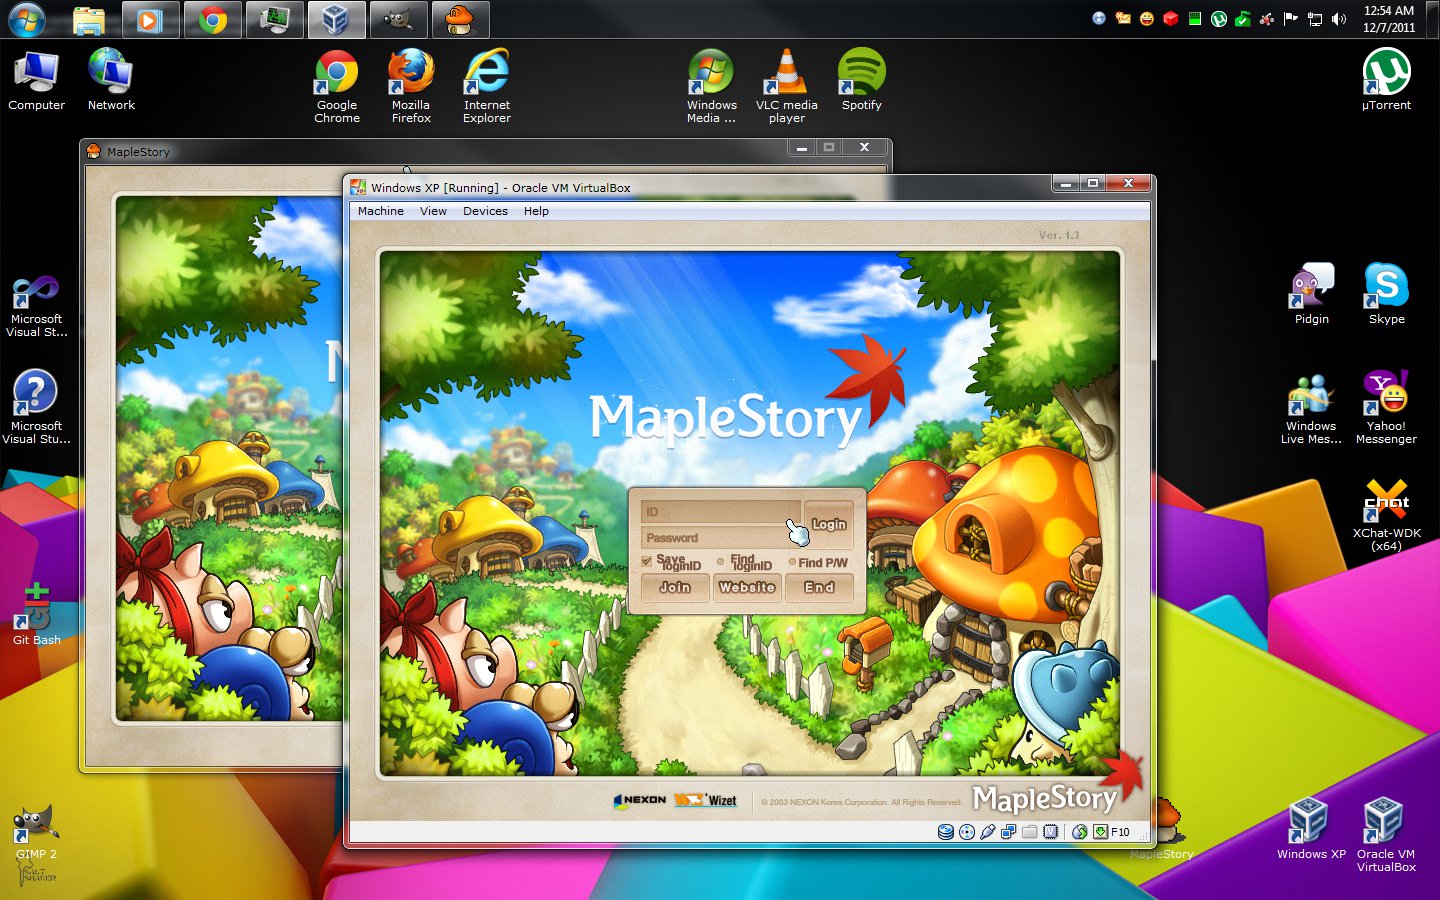 Maplestory download and installation software